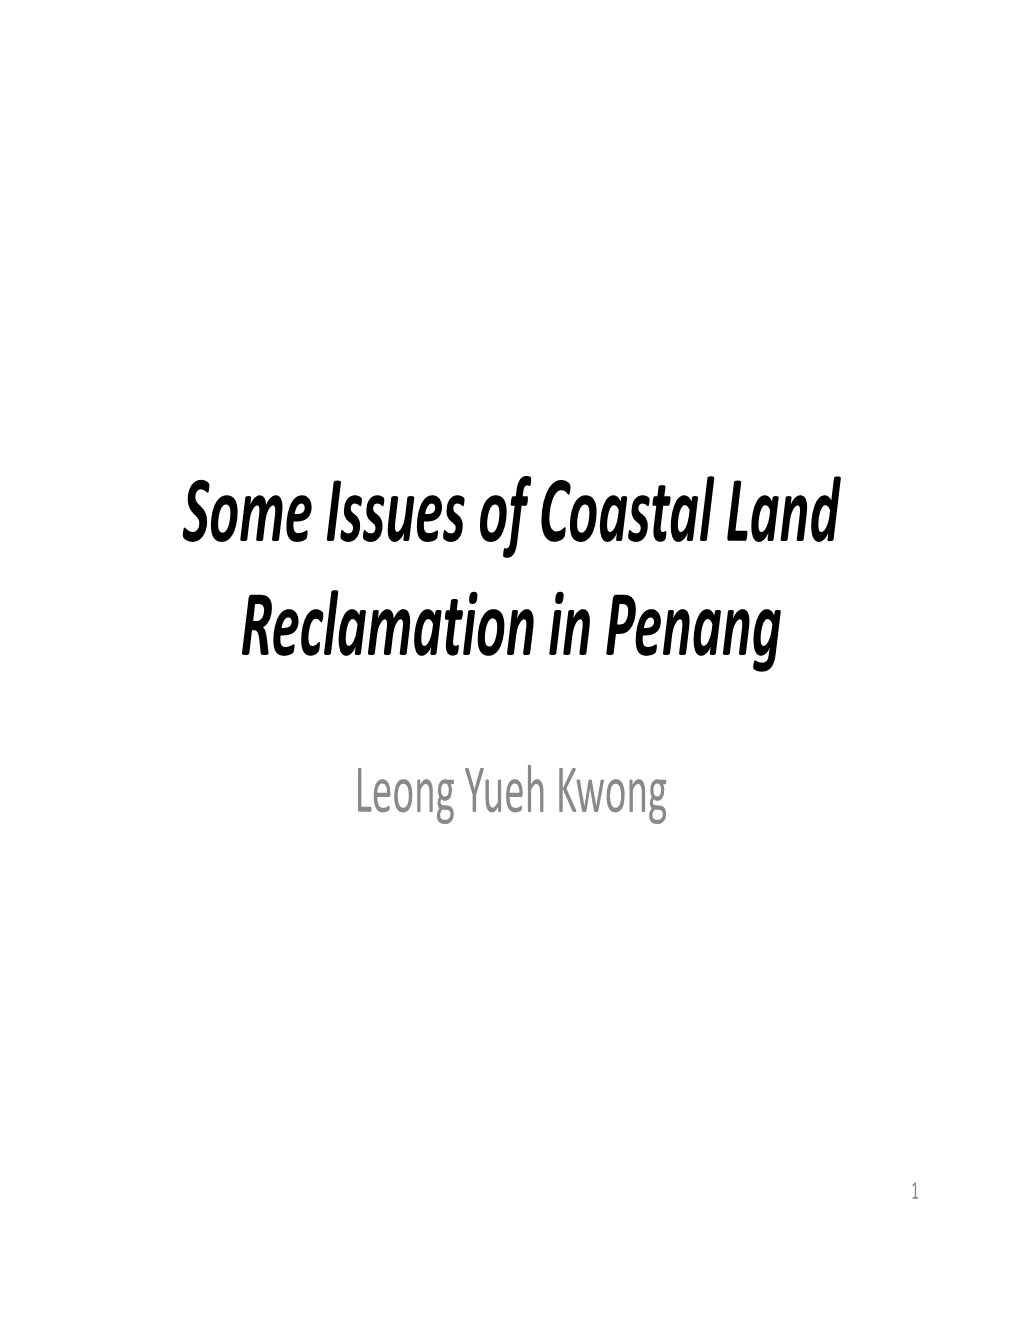 Some Issues of Coastal Land Reclamation in Penang